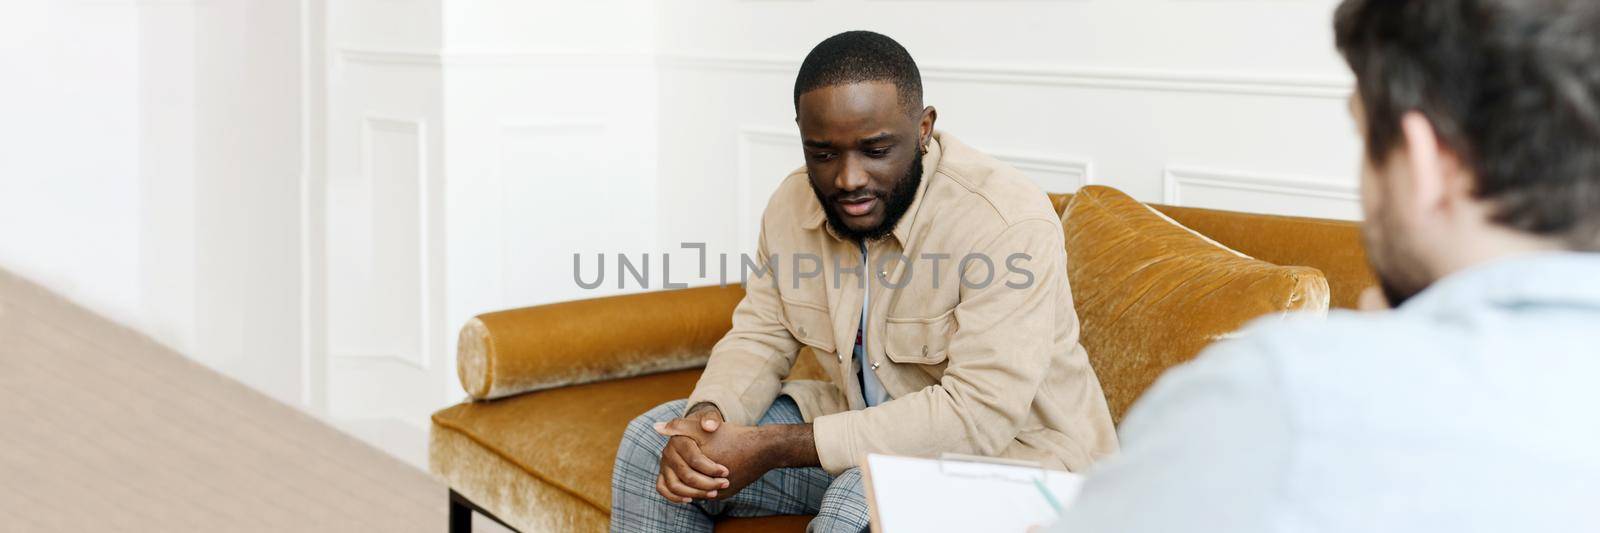 Unhappy young black man gay having session with professional psychologist at mental health clinic. Professional psychological help concept. Web banner.